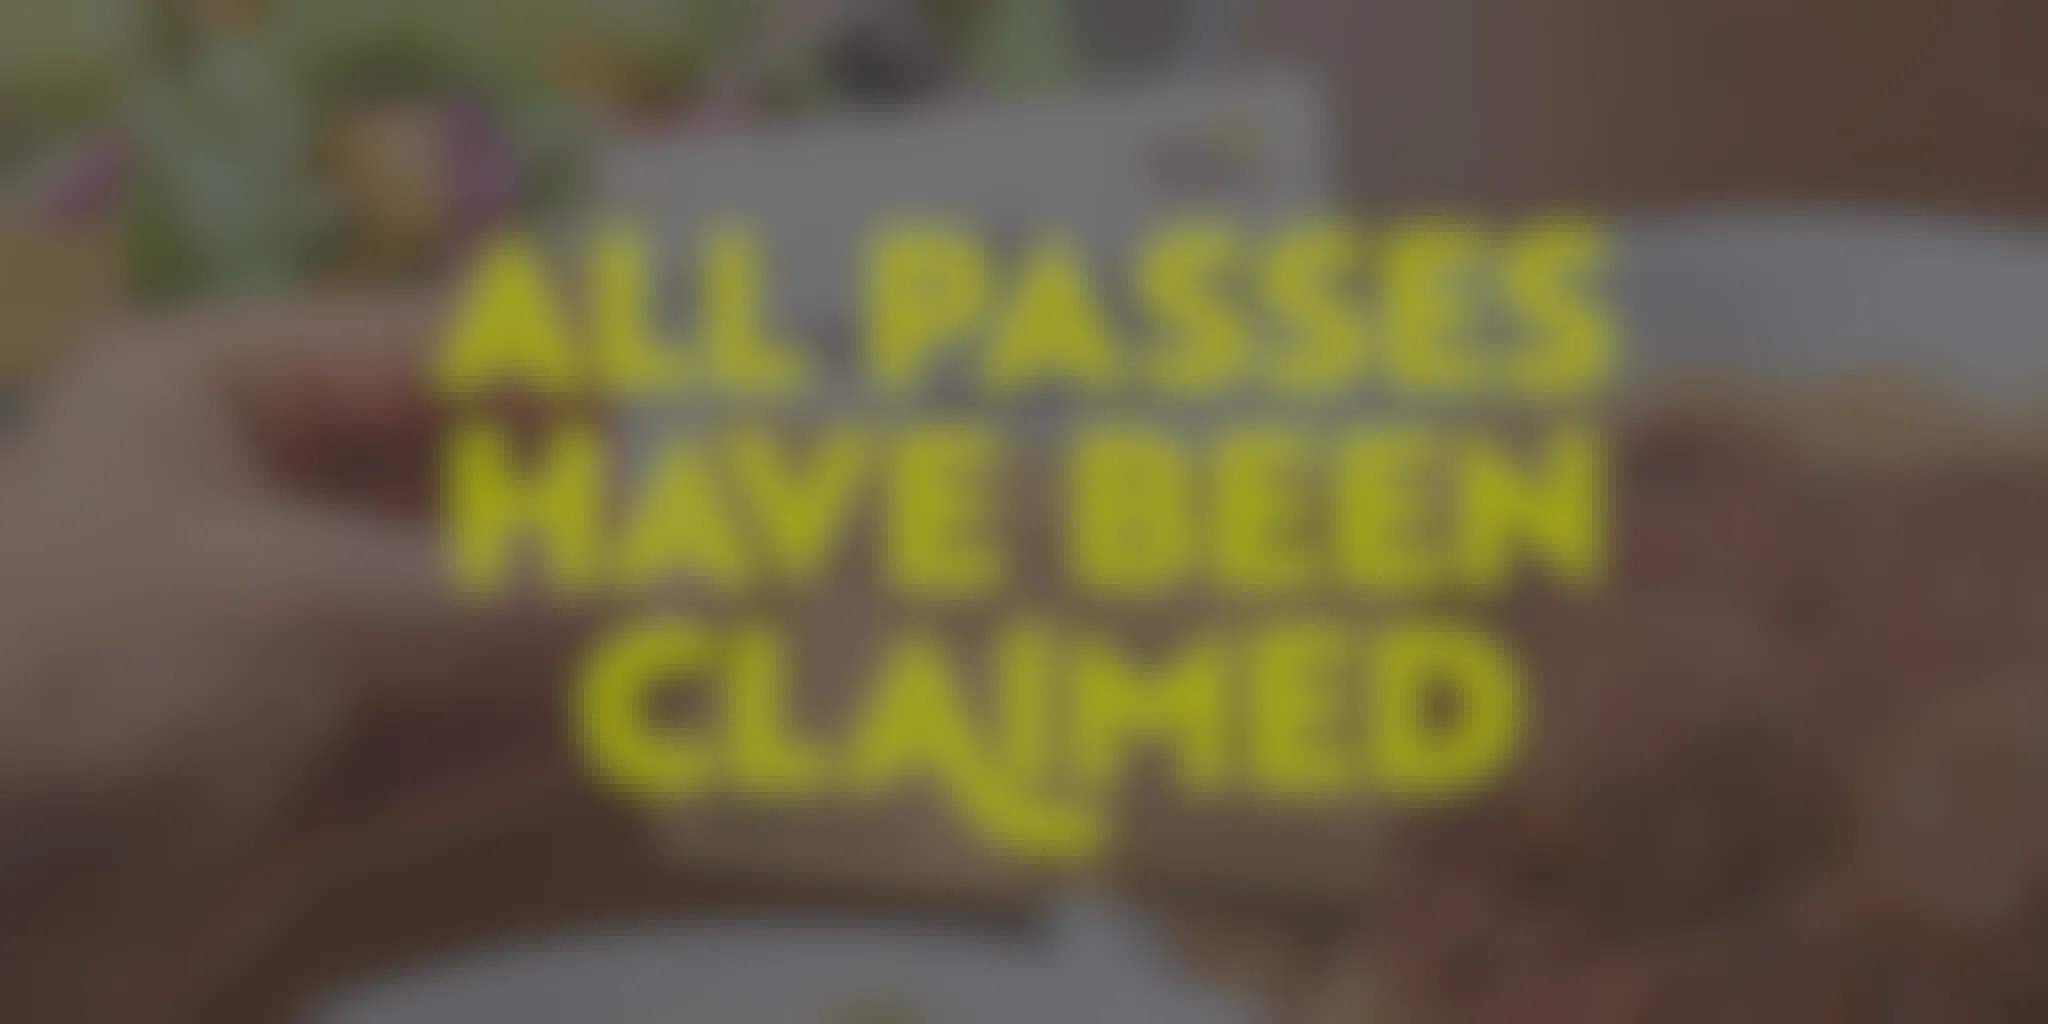 Picture of the Olive Garden Never Ending Pasta Pass with the words "all passes have been claimed" in the foreground